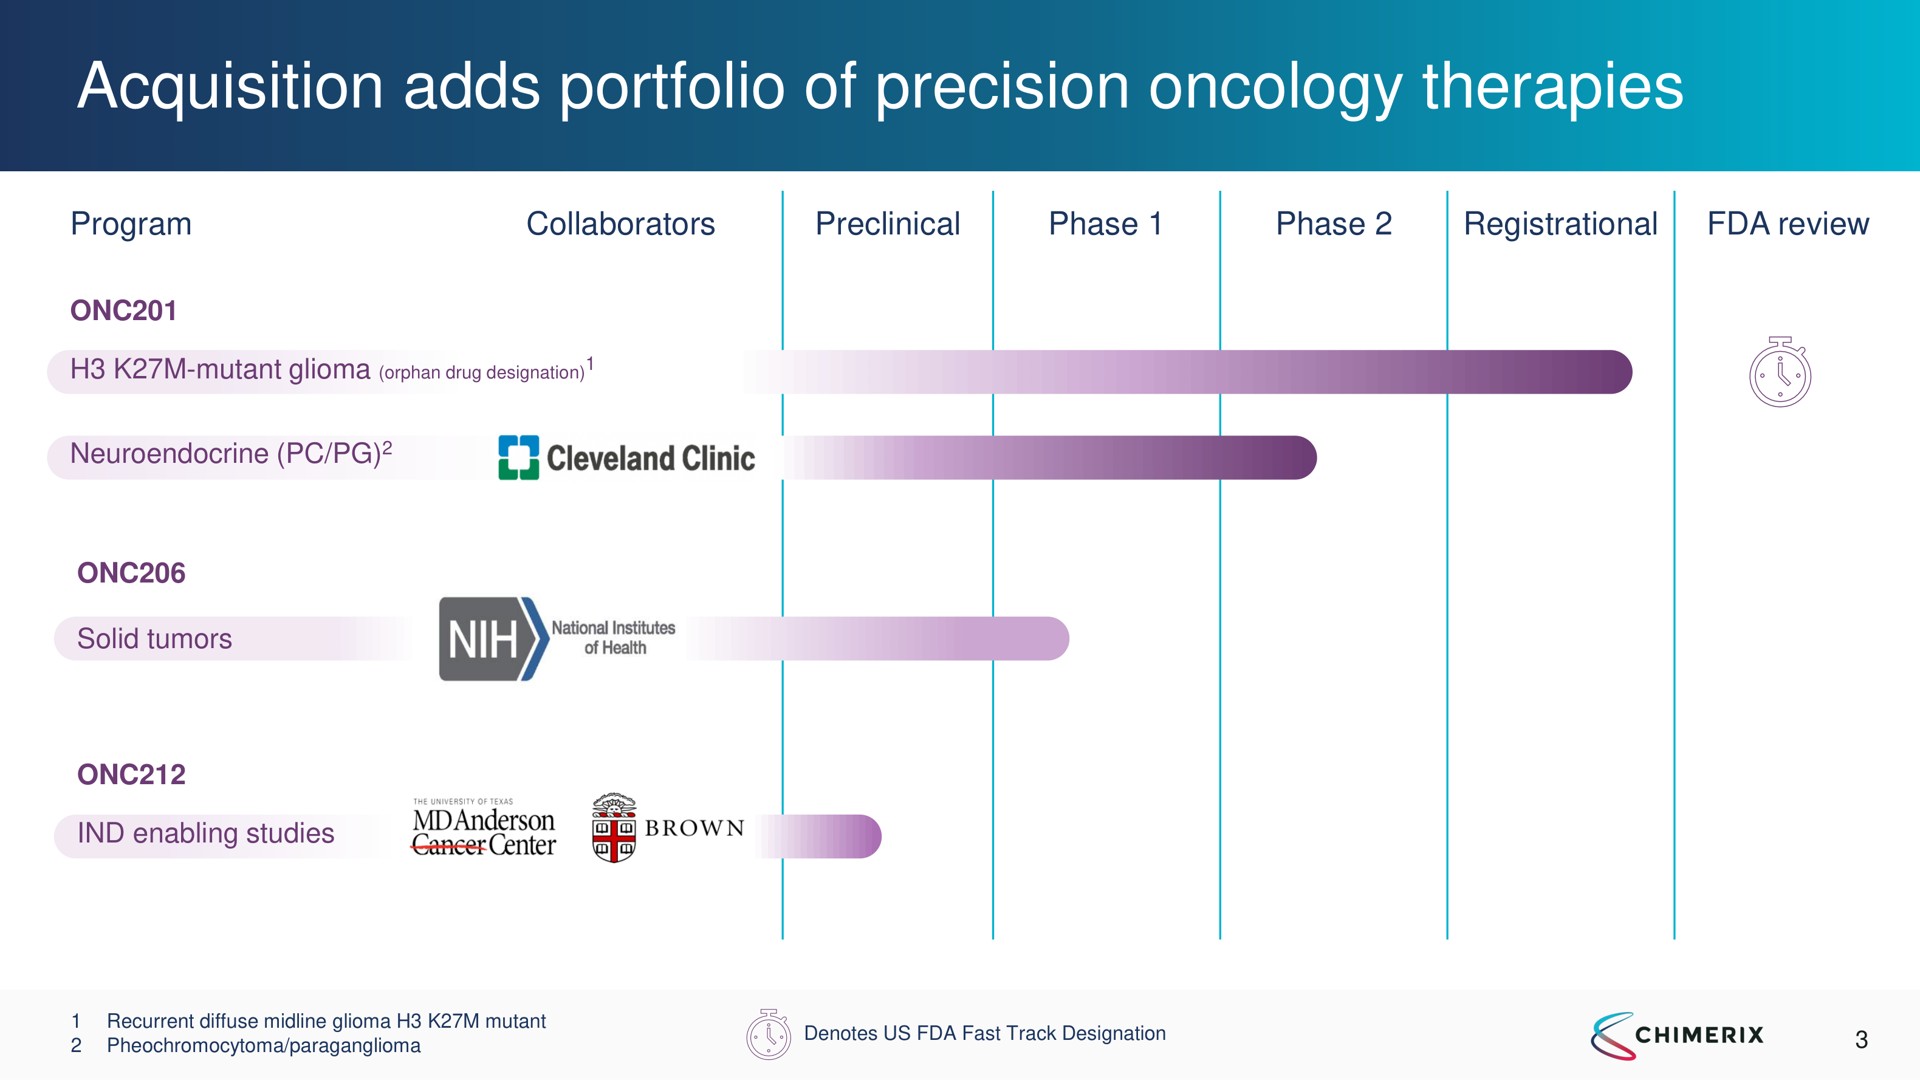 acquisition adds portfolio of precision oncology therapies | Chimerix